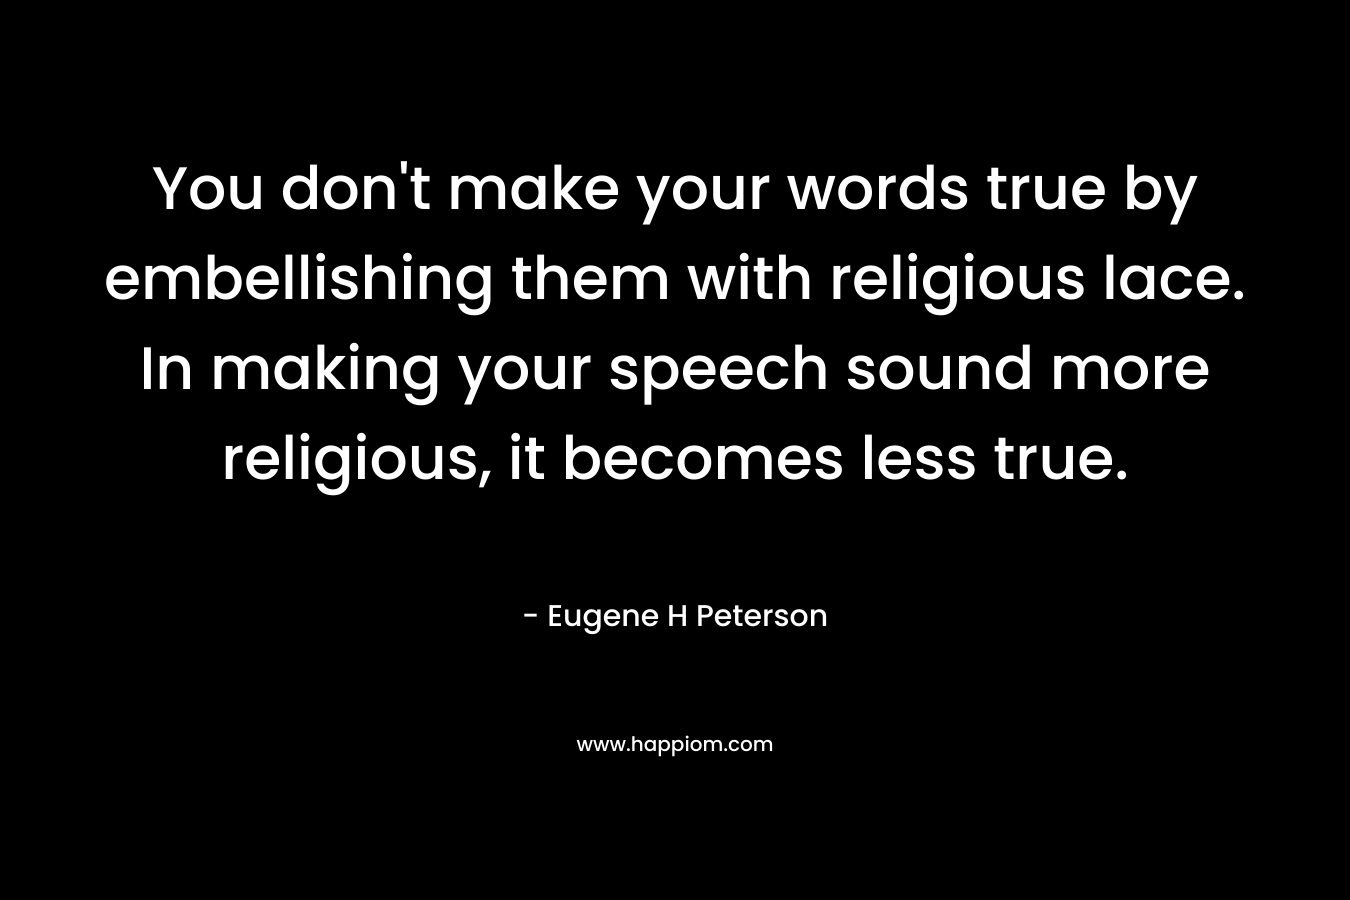 You don’t make your words true by embellishing them with religious lace. In making your speech sound more religious, it becomes less true. – Eugene H Peterson